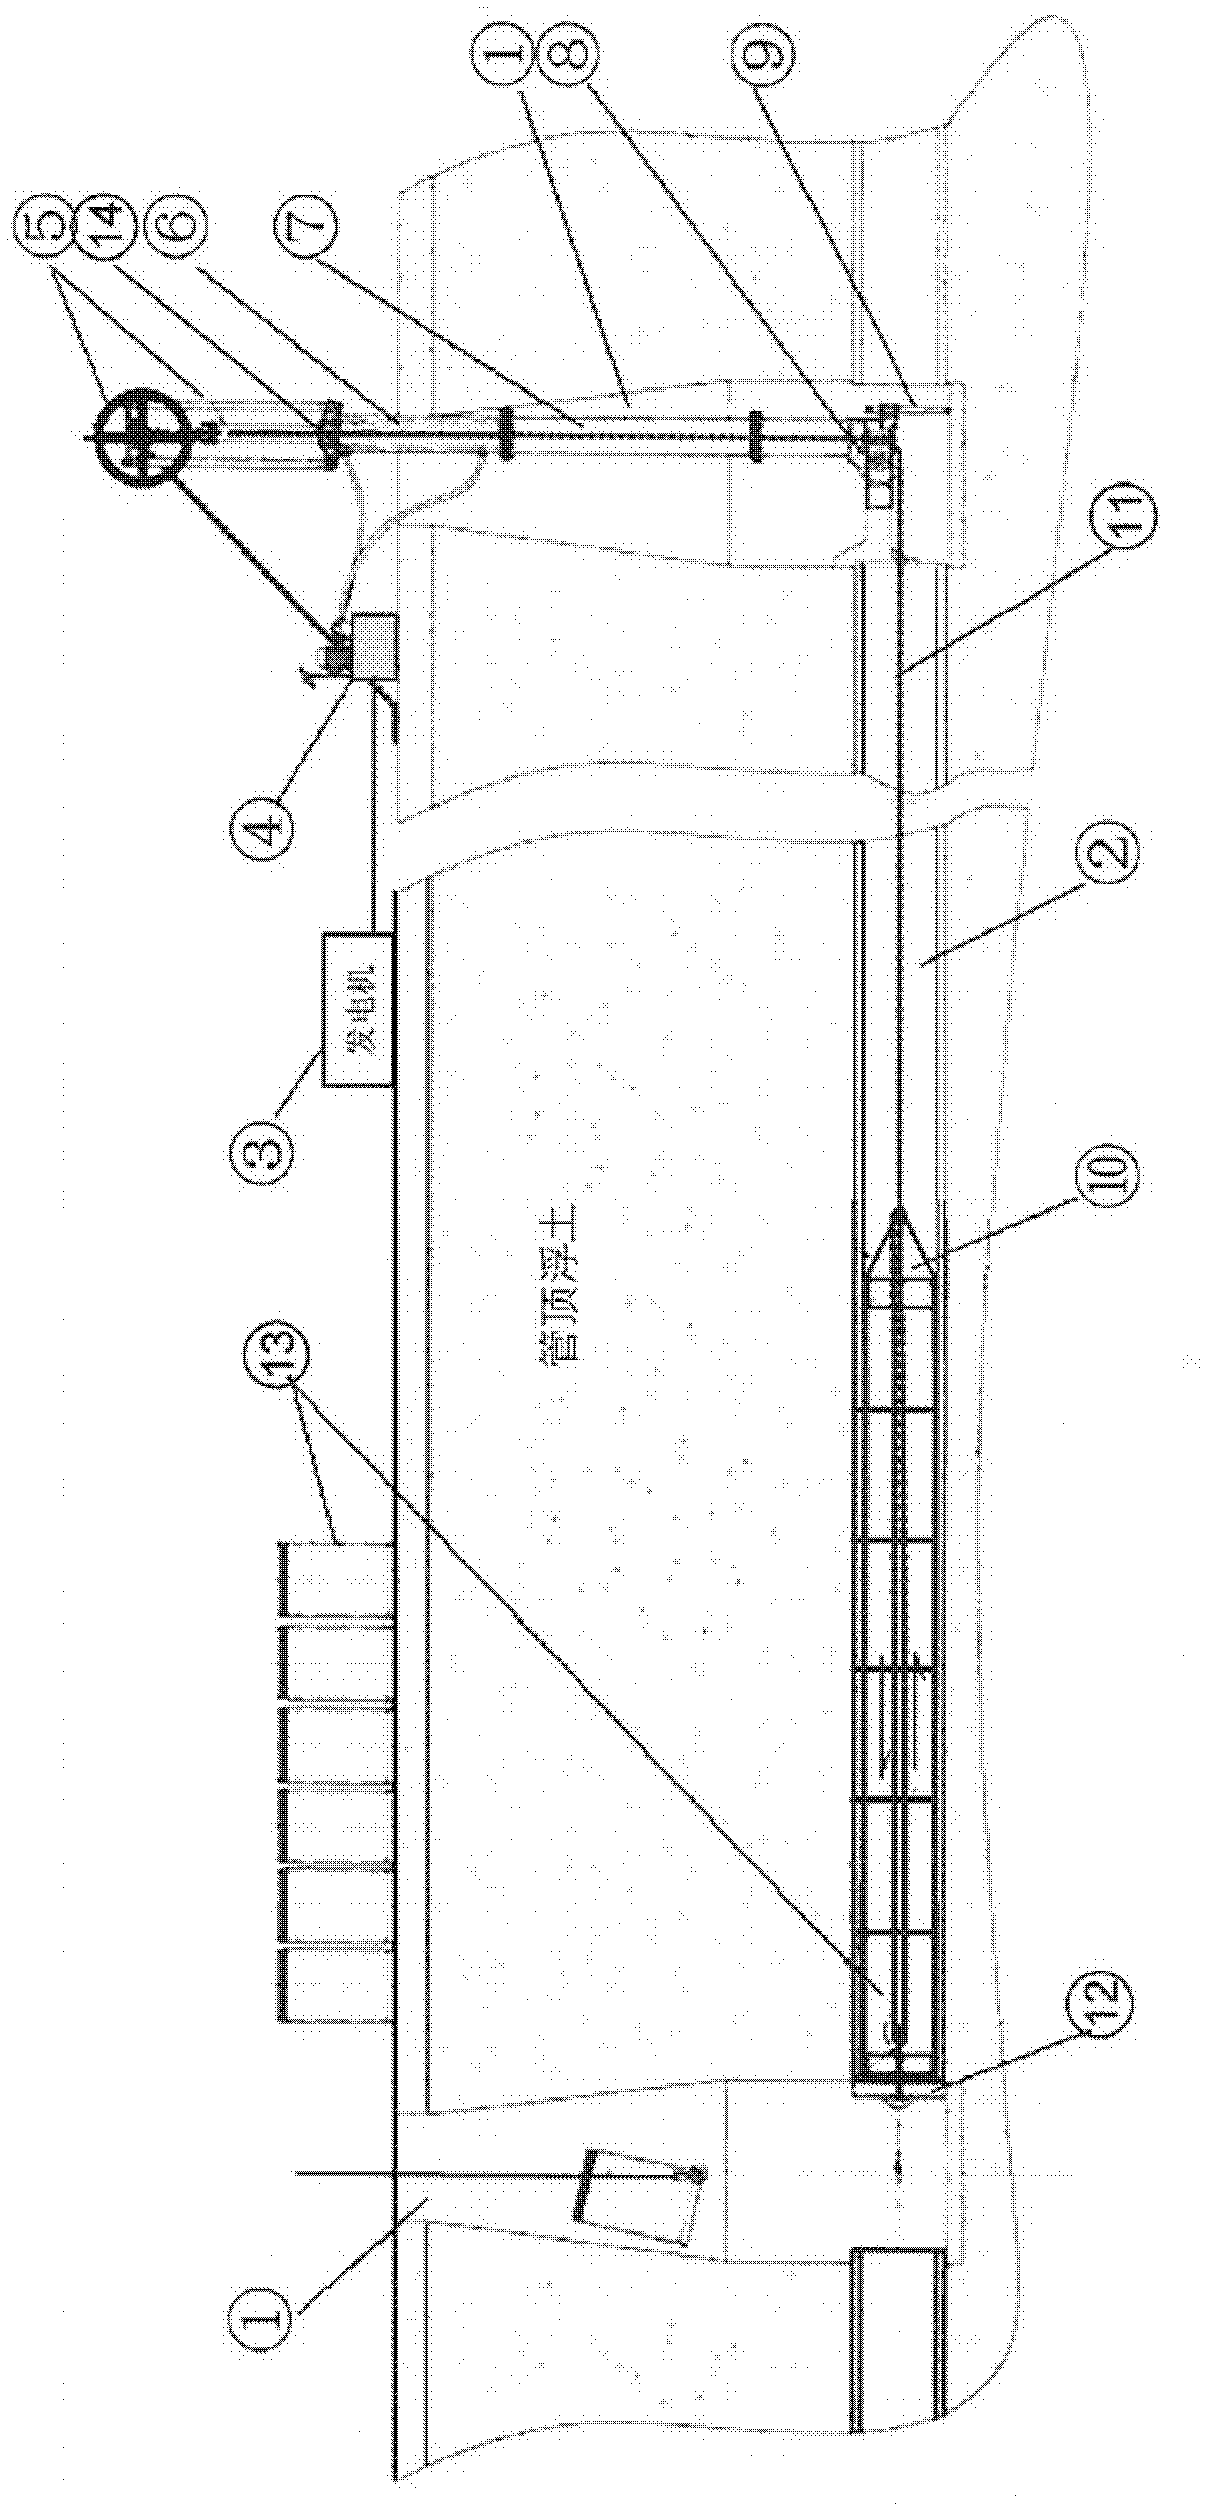 Trenchless built-in sleeve pipeline repairing equipment and method